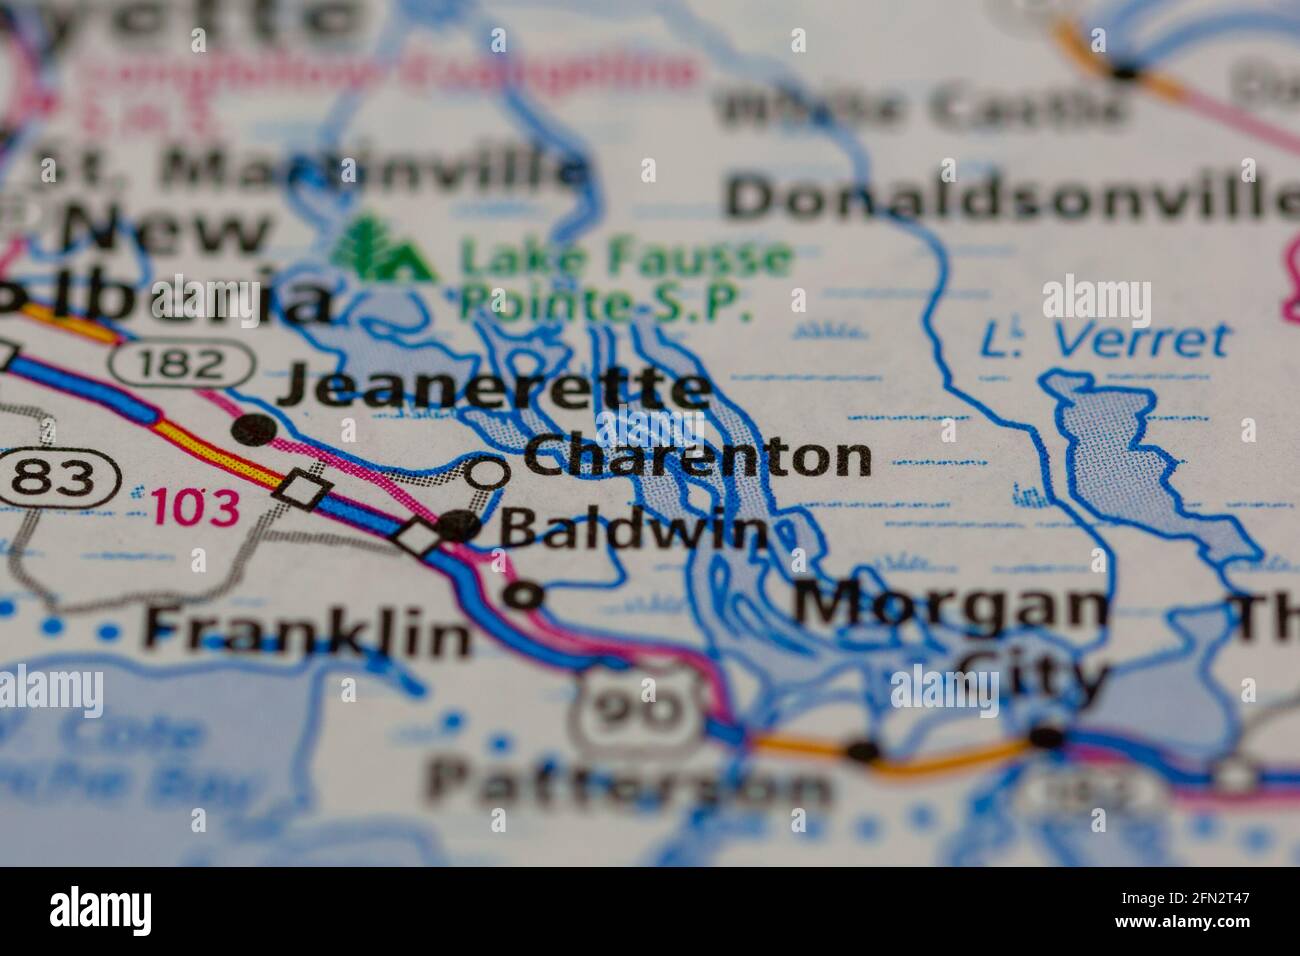 Charenton Louisiana USA Shown on a Geography map or road map Stock Photo